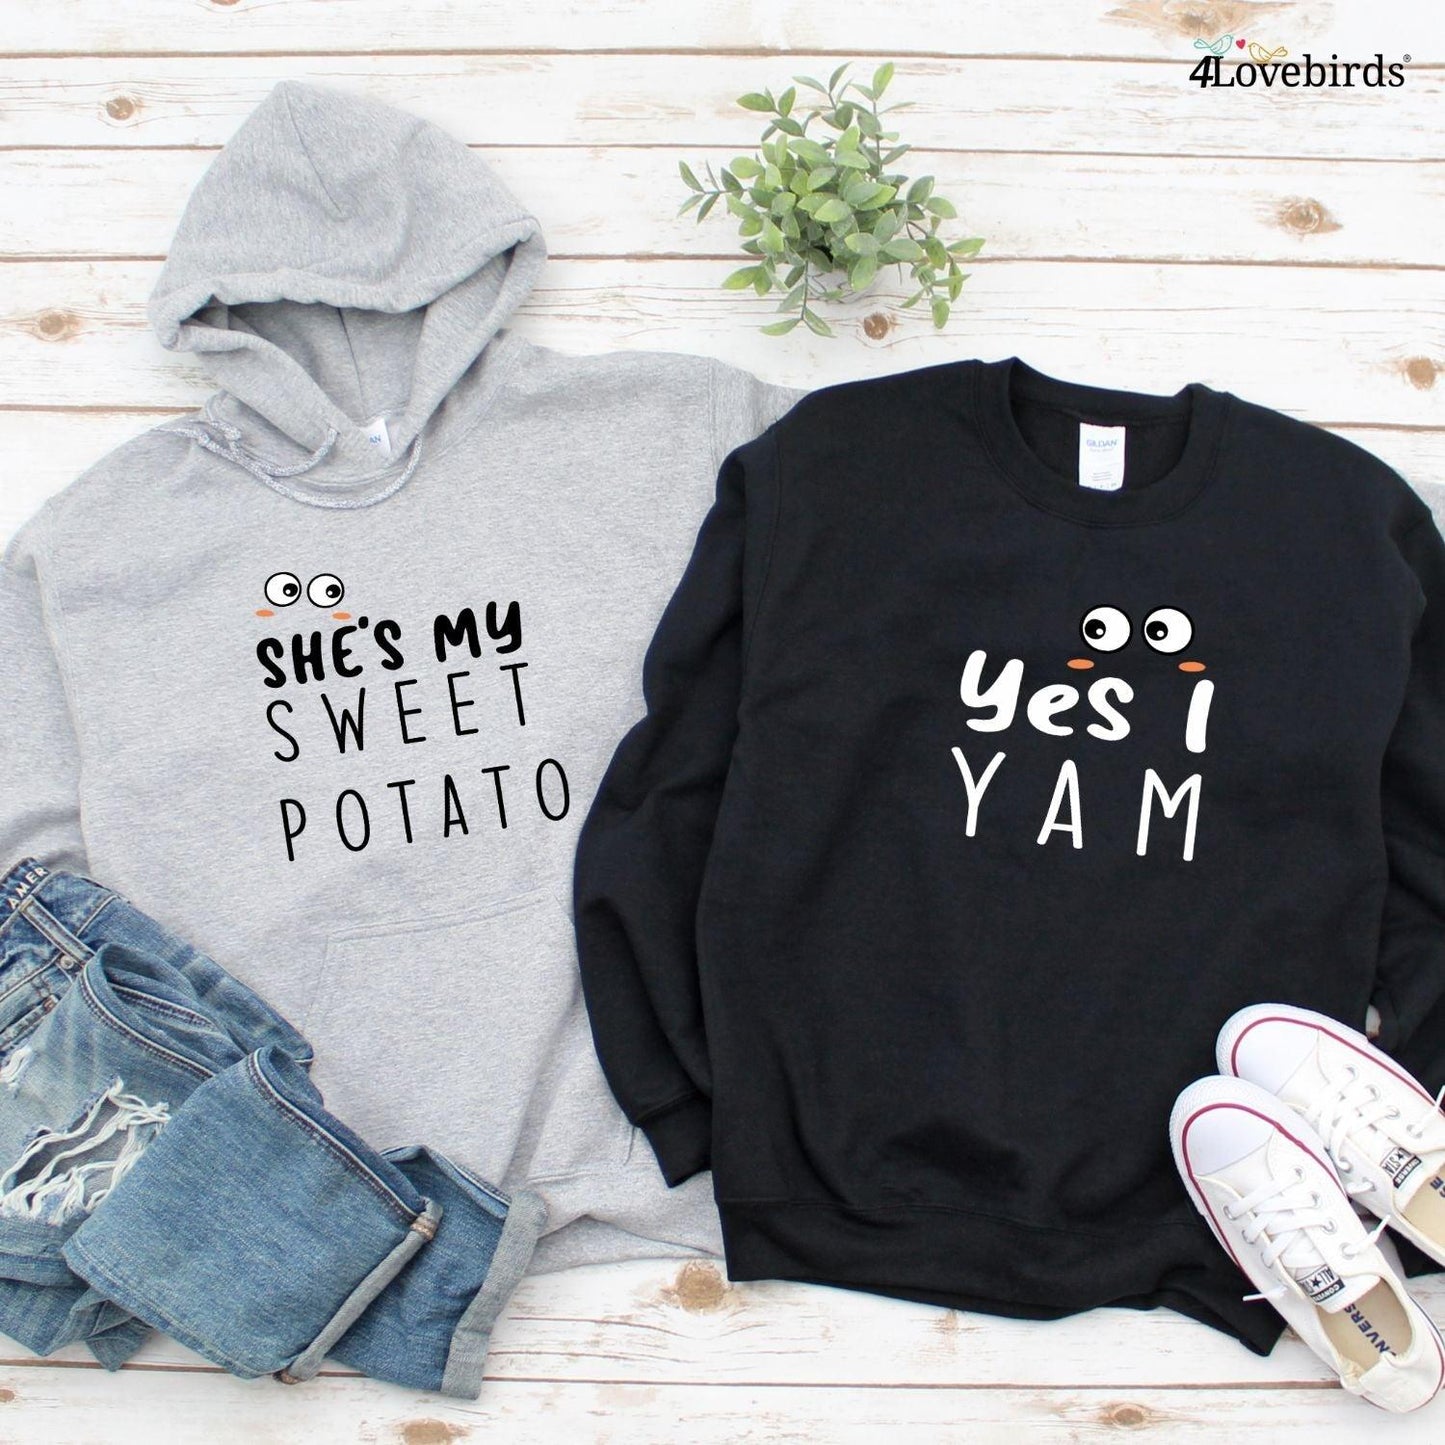 Matching Set: She's My Sweet Potato Yes I Yam Couples Outfits - Cute Gift for Couples. - 4Lovebirds